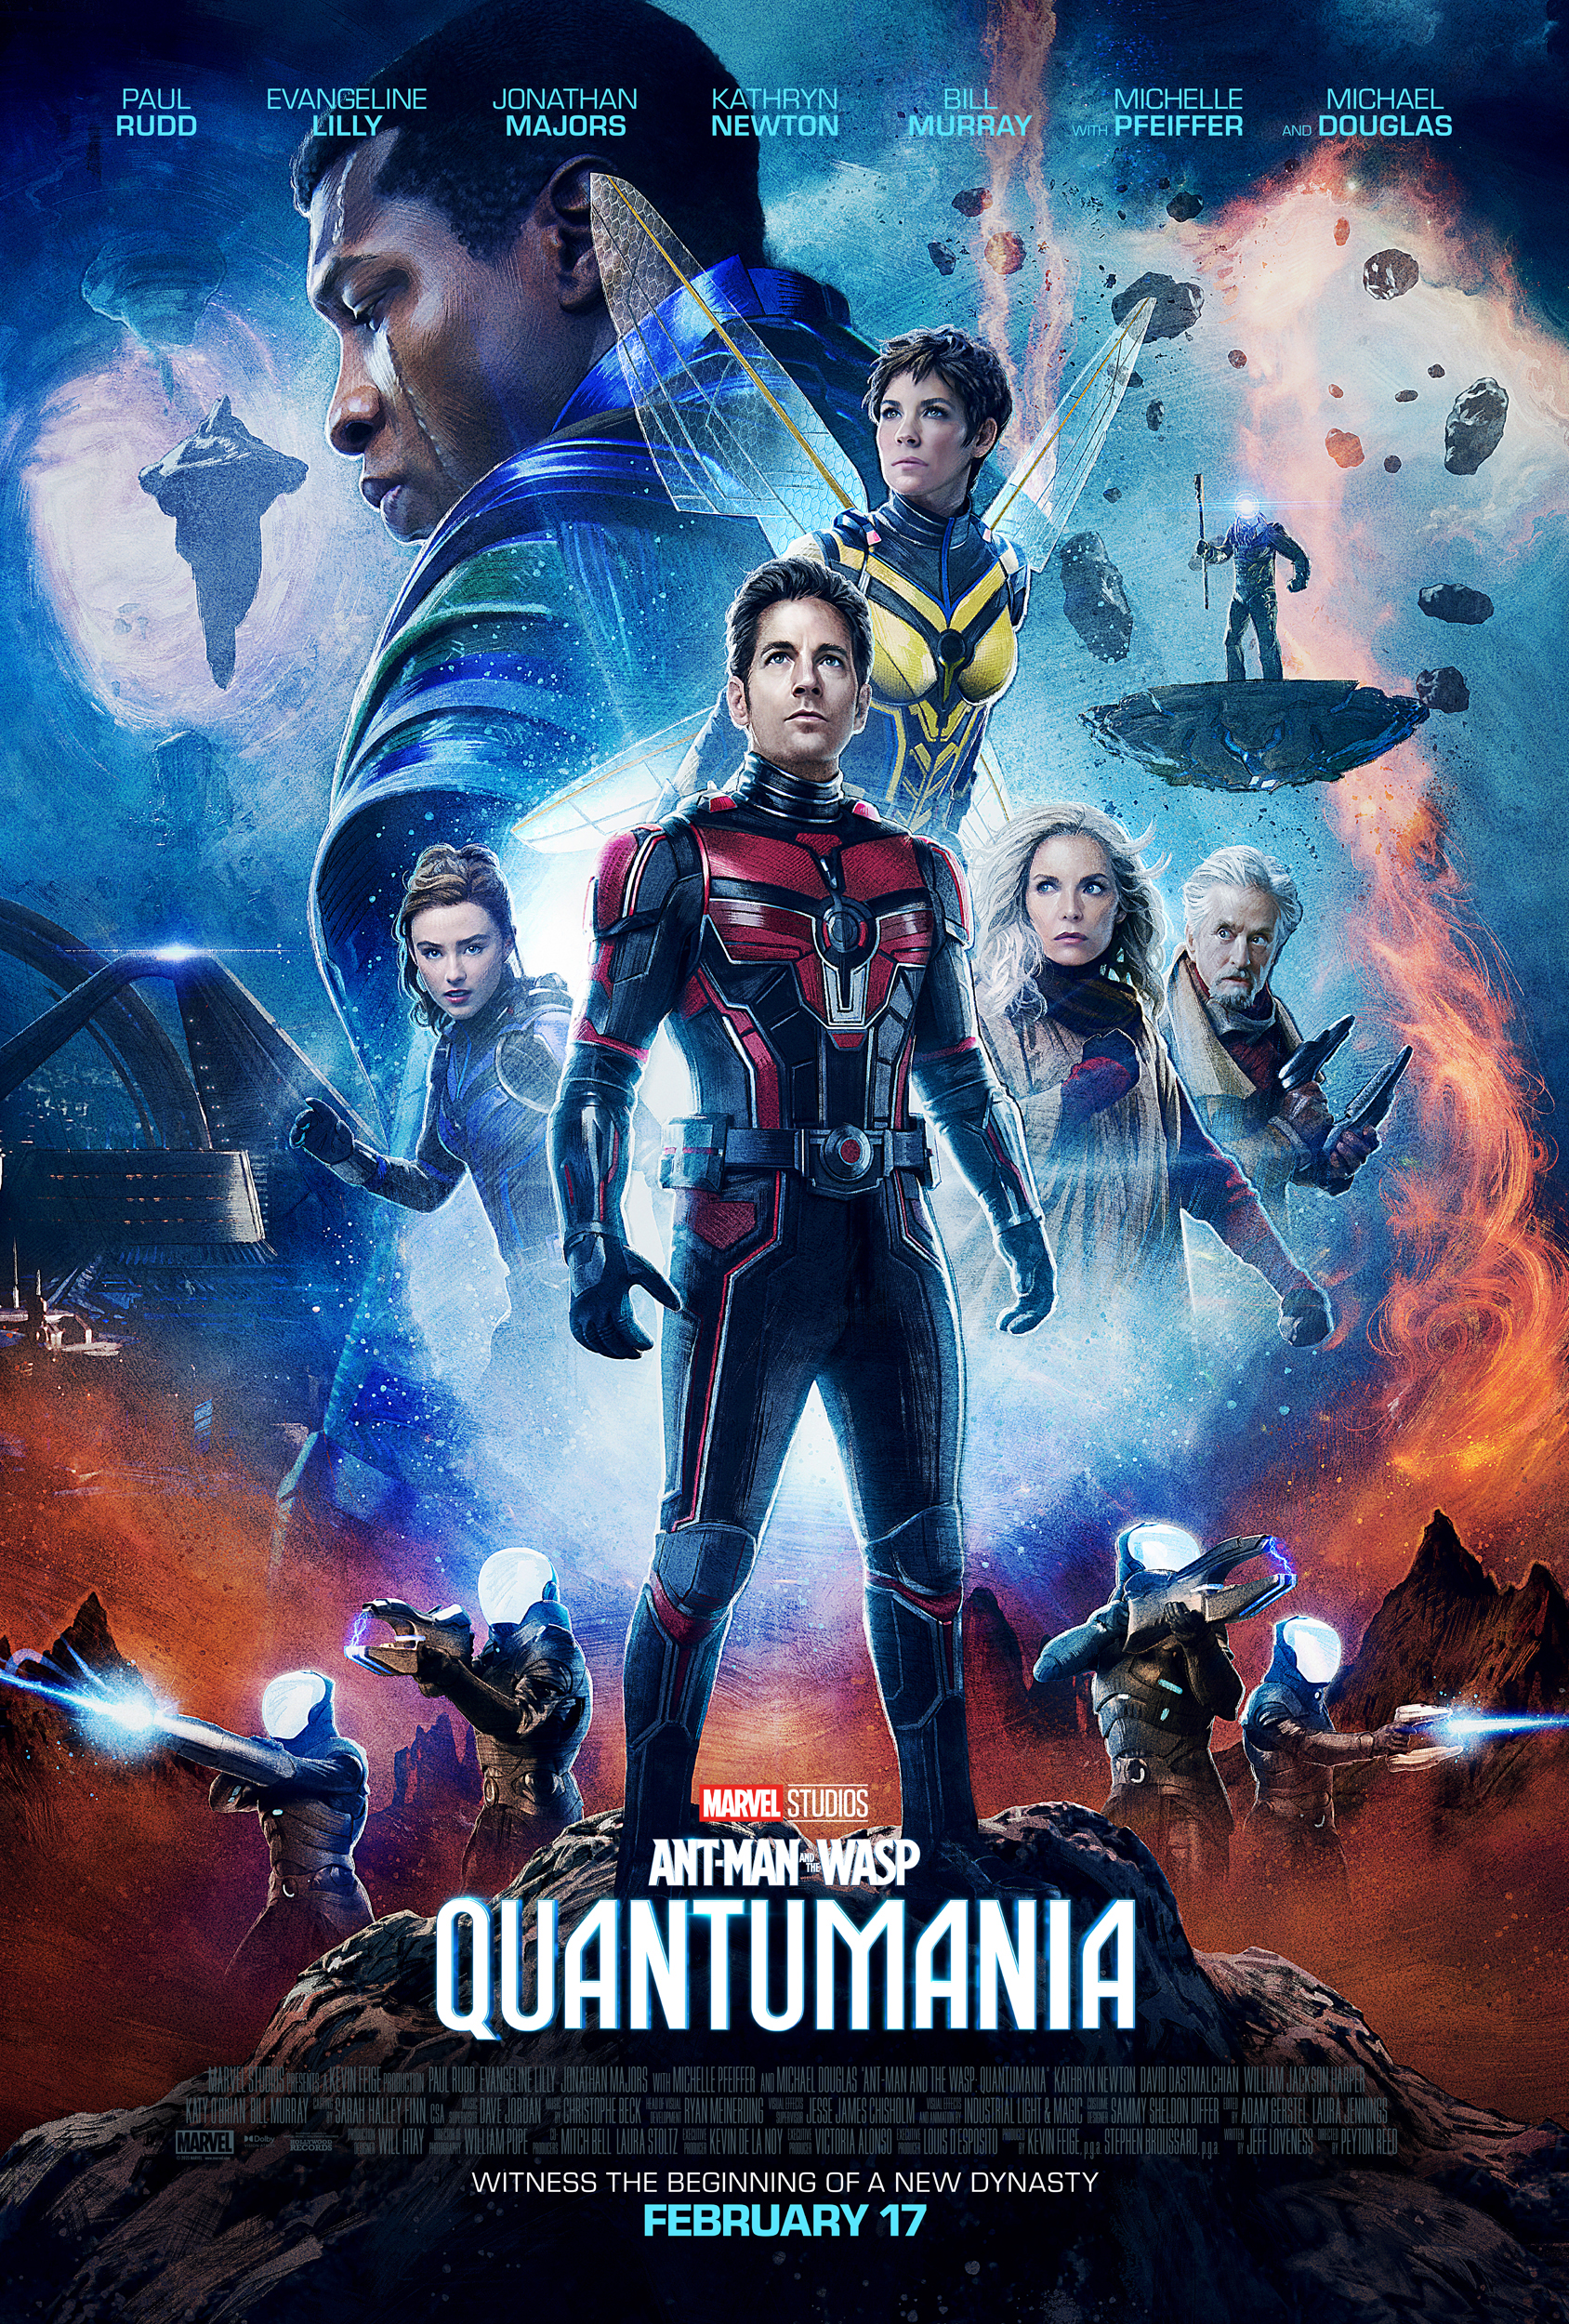 Ant-Man and the Wasp: Quantumania' trailer dives into Quantum Realm